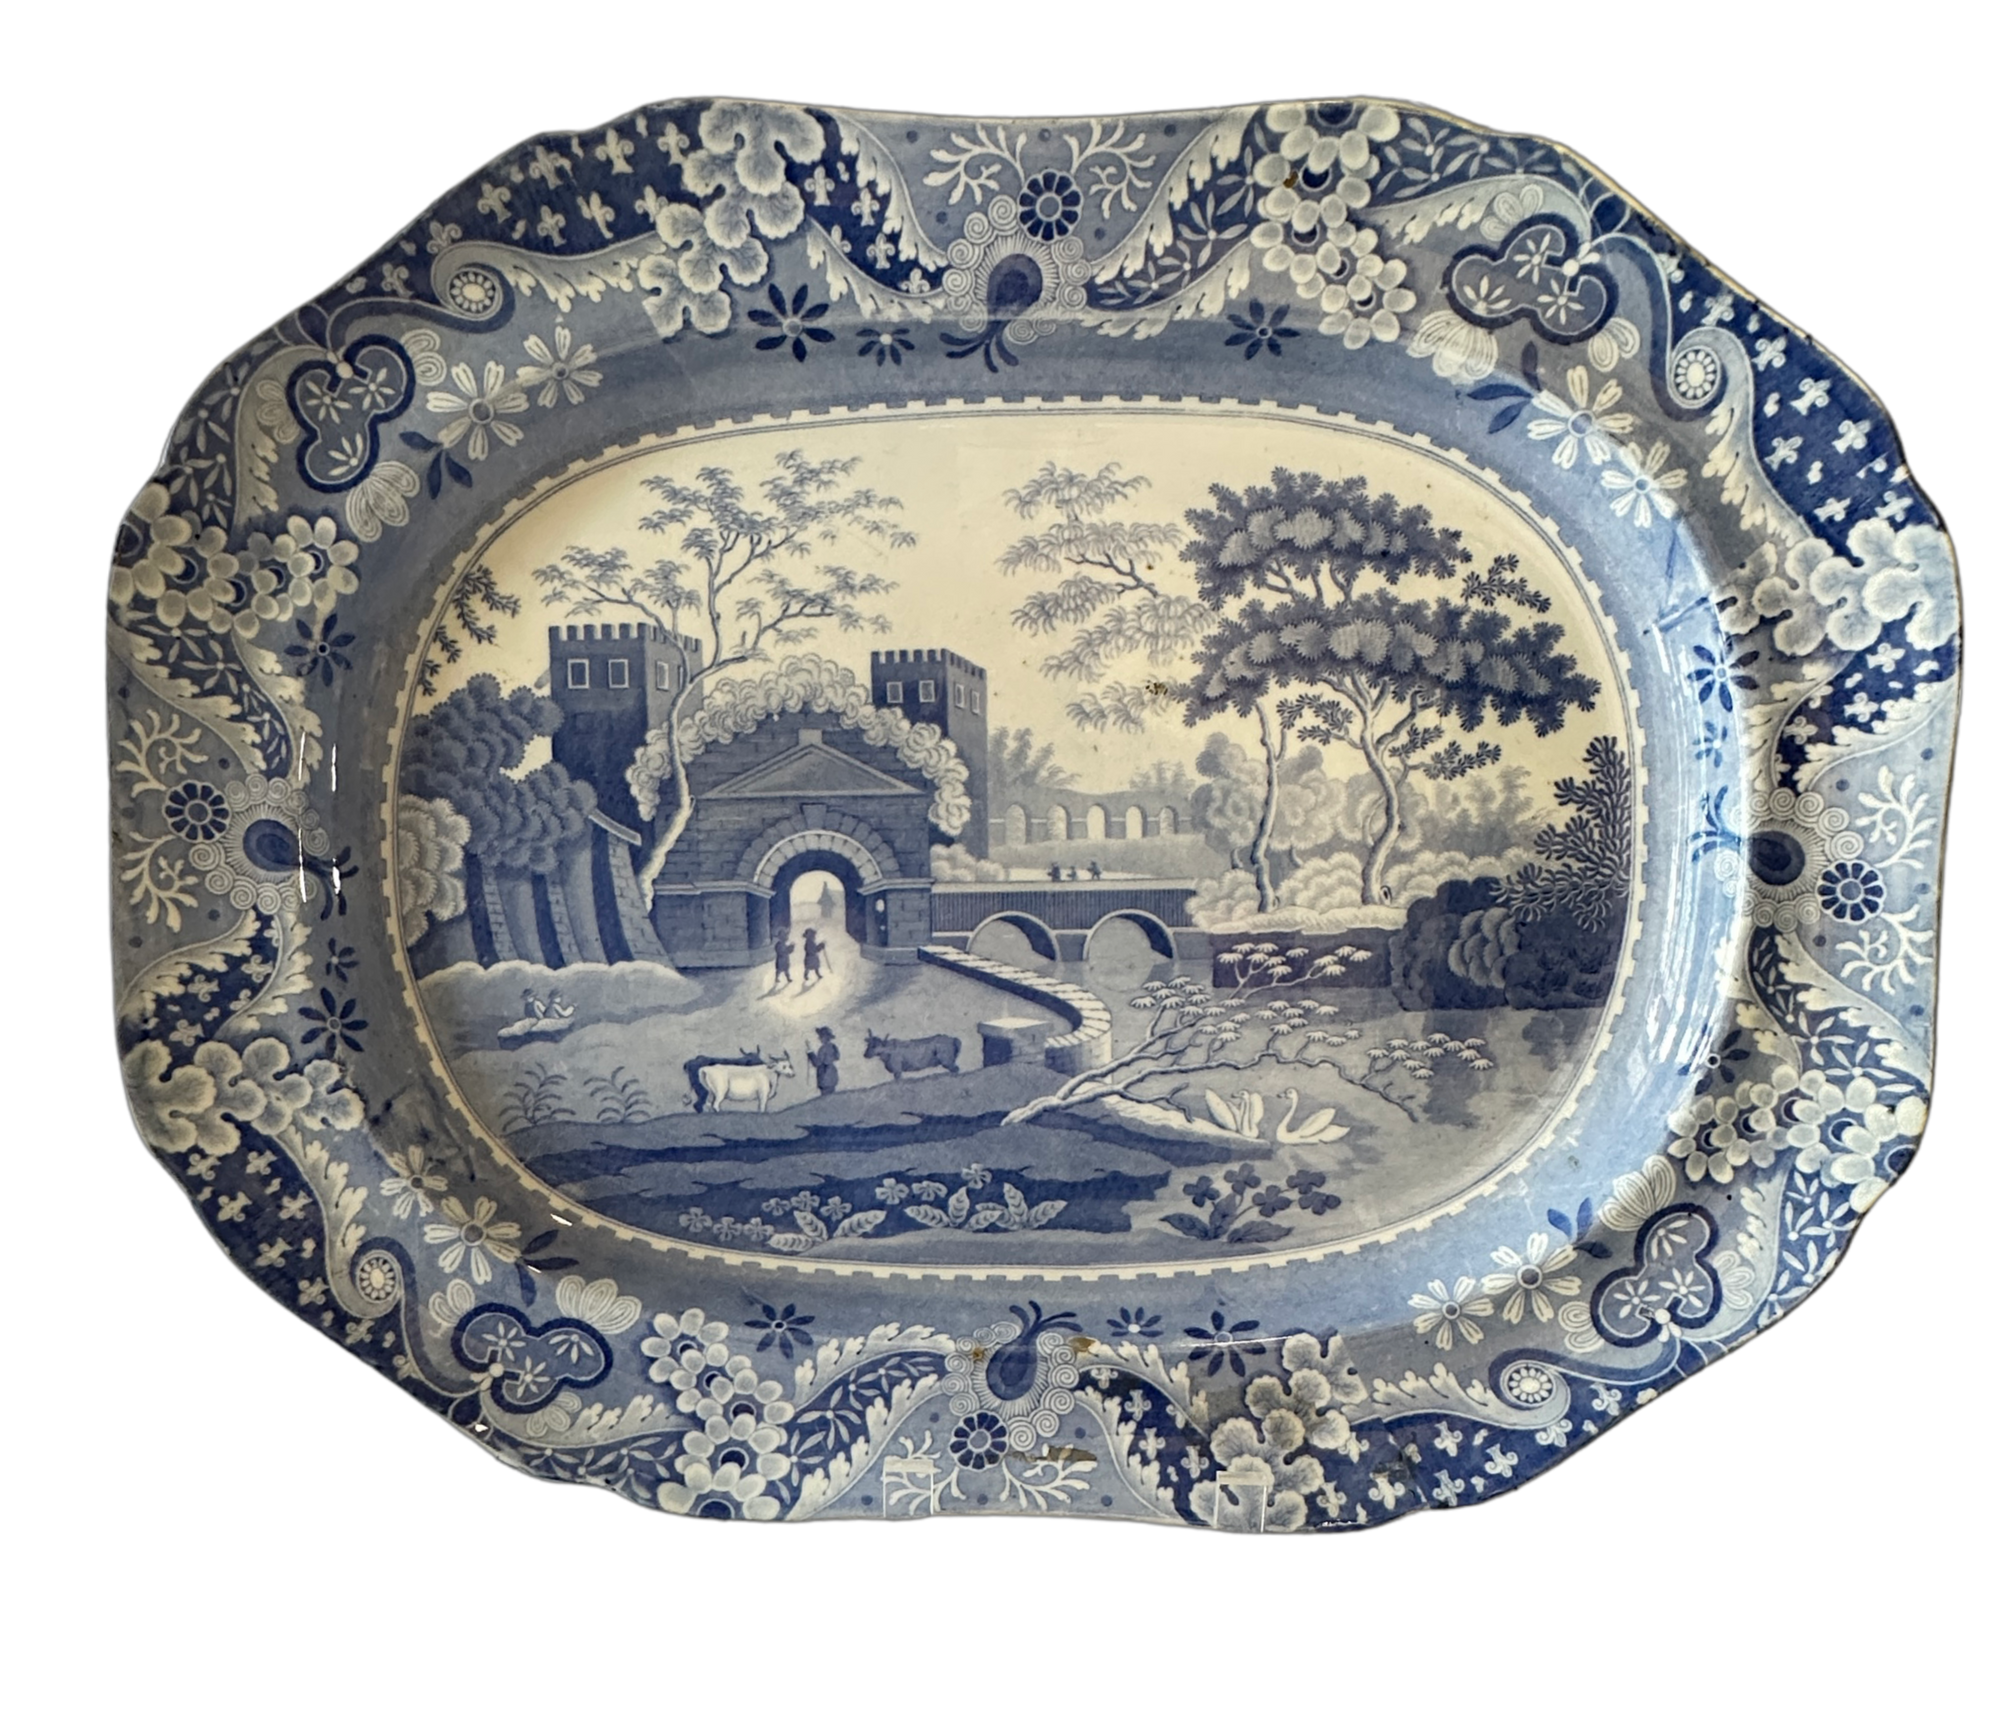 Antique Spode Blue and White Castle Platter - Hunt and Bloom